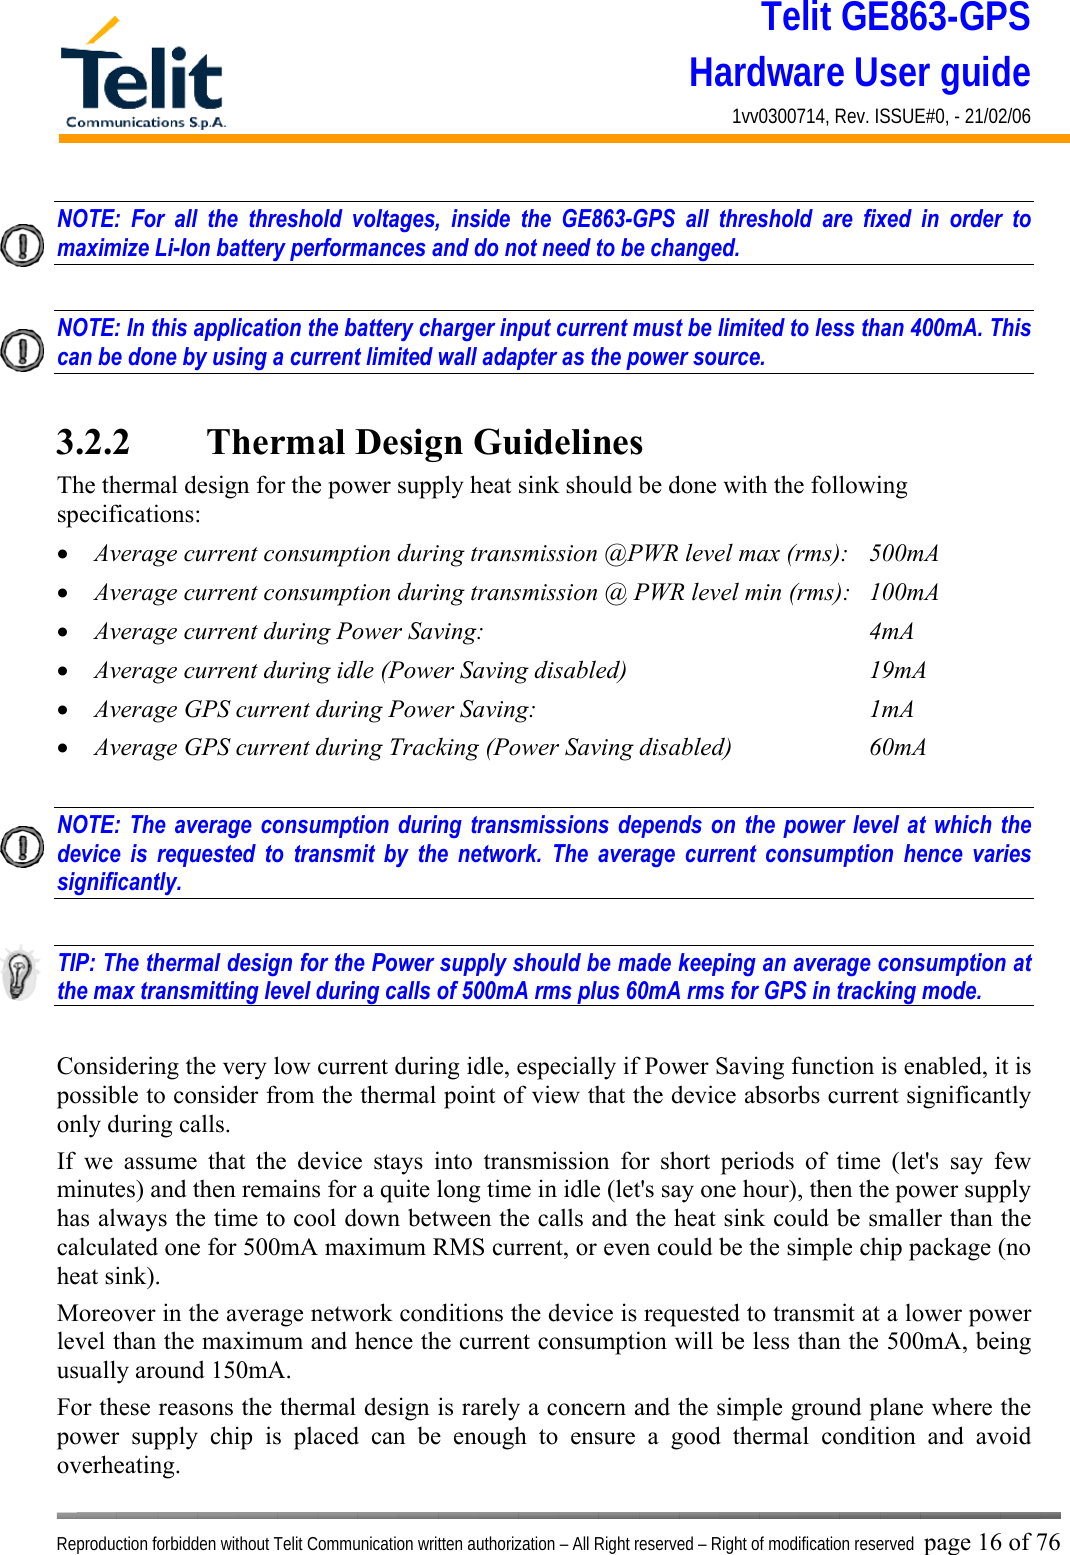 Telit GE863-GPS Hardware User guide 1vv0300714, Rev. ISSUE#0, - 21/02/06    Reproduction forbidden without Telit Communication written authorization – All Right reserved – Right of modification reserved page 16 of 76 NOTE: For all the threshold voltages, inside the GE863-GPS all threshold are fixed in order to maximize Li-Ion battery performances and do not need to be changed.  NOTE: In this application the battery charger input current must be limited to less than 400mA. This can be done by using a current limited wall adapter as the power source.  3.2.2   Thermal Design Guidelines The thermal design for the power supply heat sink should be done with the following specifications: •  Average current consumption during transmission @PWR level max (rms):  500mA •  Average current consumption during transmission @ PWR level min (rms):  100mA  •  Average current during Power Saving:             4mA •  Average current during idle (Power Saving disabled)        19mA •  Average GPS current during Power Saving:           1mA •  Average GPS current during Tracking (Power Saving disabled)    60mA  NOTE: The average consumption during transmissions depends on the power level at which the device is requested to transmit by the network. The average current consumption hence varies significantly.  TIP: The thermal design for the Power supply should be made keeping an average consumption at the max transmitting level during calls of 500mA rms plus 60mA rms for GPS in tracking mode.  Considering the very low current during idle, especially if Power Saving function is enabled, it is possible to consider from the thermal point of view that the device absorbs current significantly only during calls.  If we assume that the device stays into transmission for short periods of time (let&apos;s say few minutes) and then remains for a quite long time in idle (let&apos;s say one hour), then the power supply has always the time to cool down between the calls and the heat sink could be smaller than the calculated one for 500mA maximum RMS current, or even could be the simple chip package (no heat sink). Moreover in the average network conditions the device is requested to transmit at a lower power level than the maximum and hence the current consumption will be less than the 500mA, being usually around 150mA. For these reasons the thermal design is rarely a concern and the simple ground plane where the power supply chip is placed can be enough to ensure a good thermal condition and avoid overheating.  